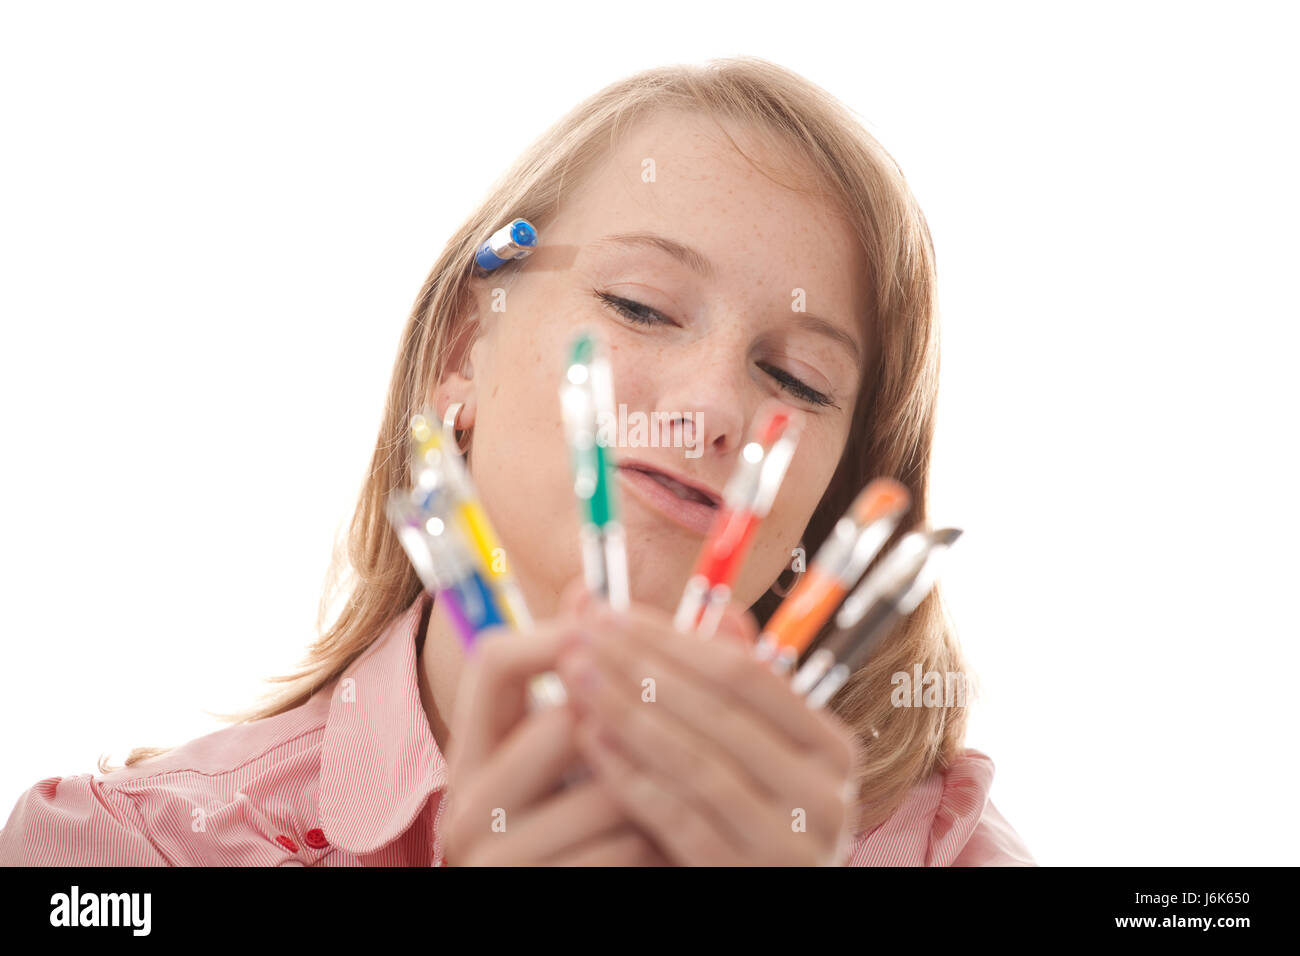 woman with colored pencils Stock Photo